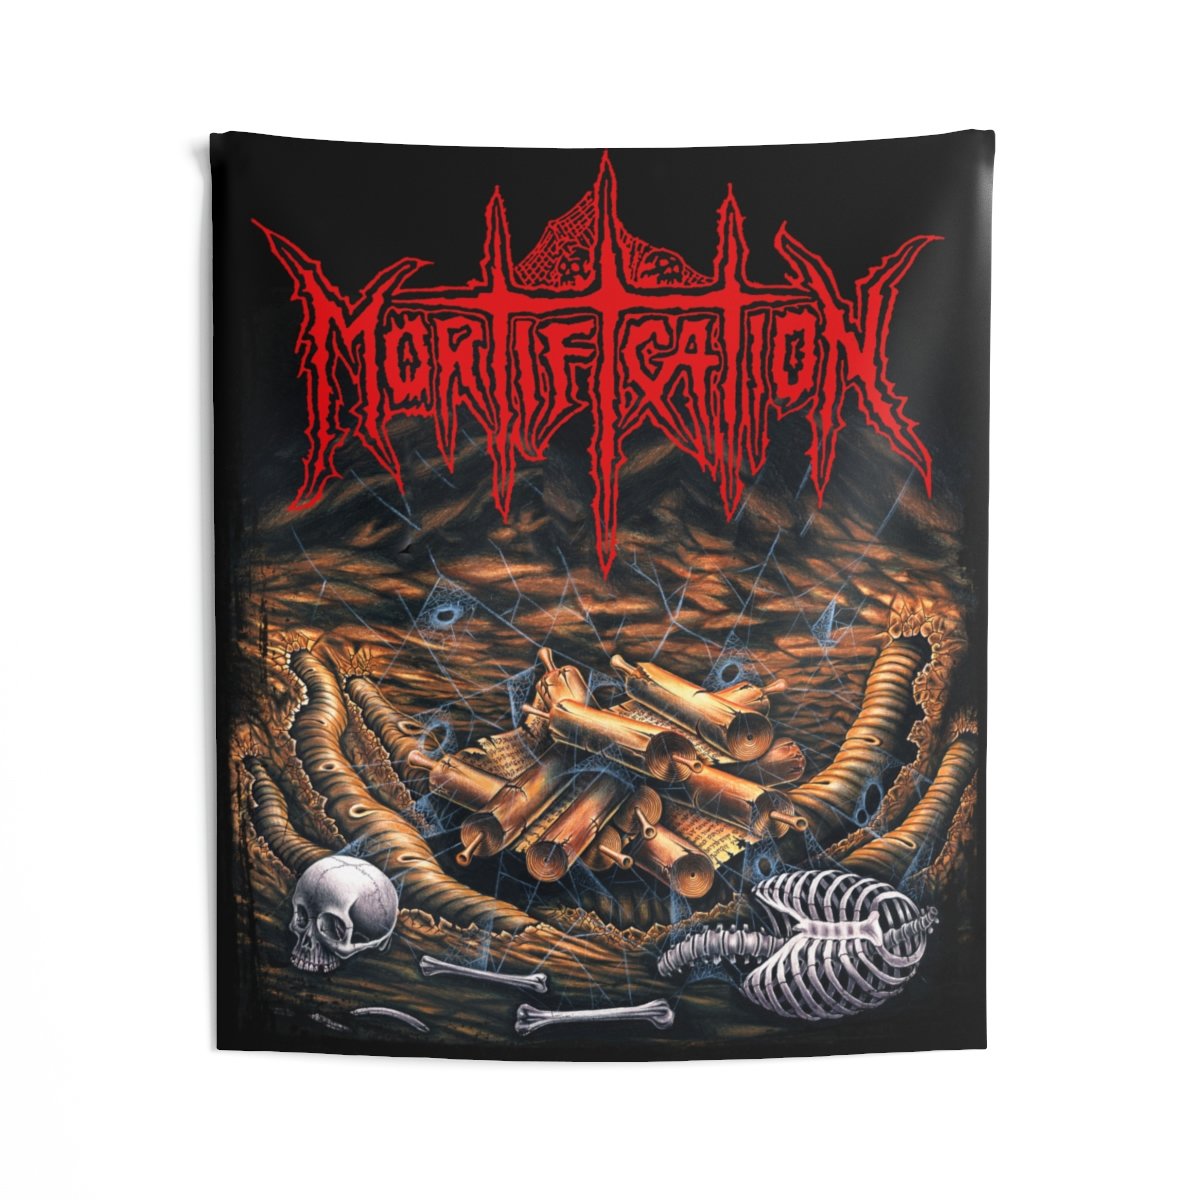 Mortification – Scrolls of the Megilloth Indoor Wall Tapestries